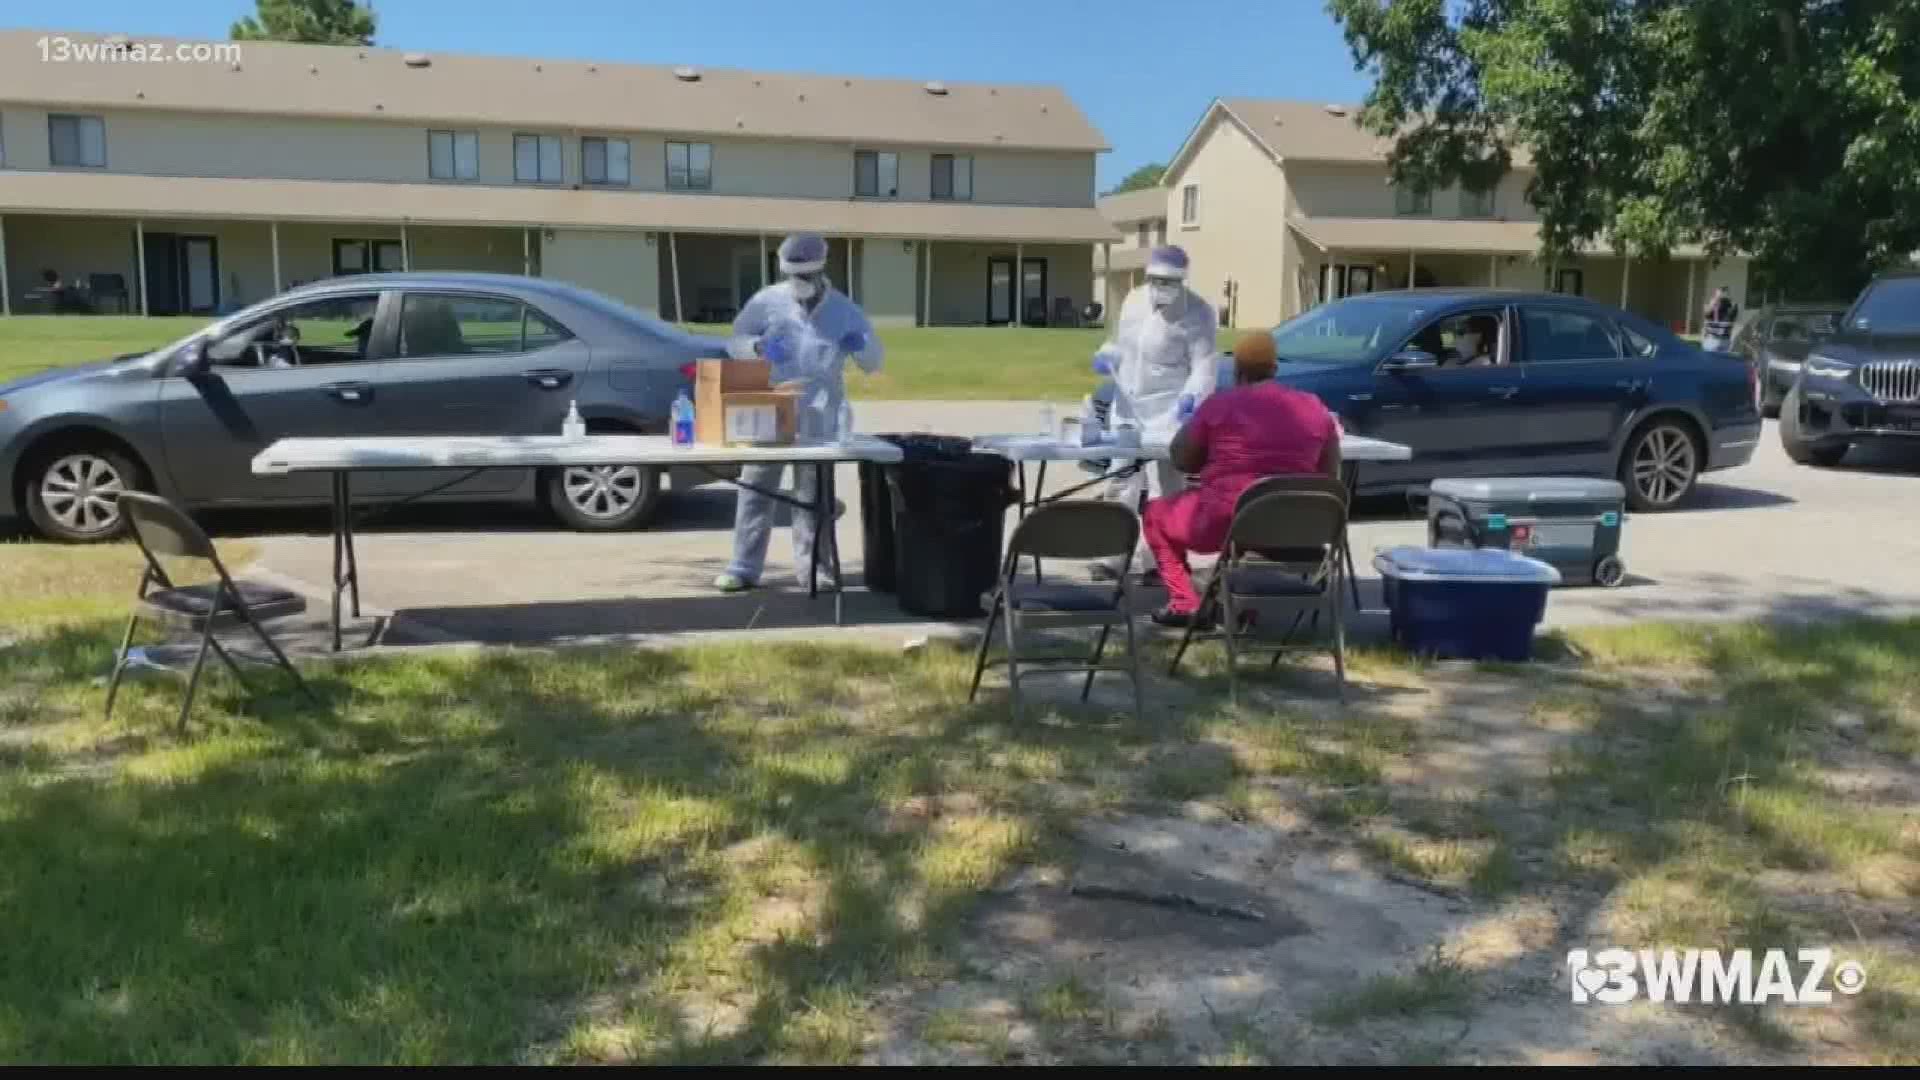 Free testing was held Saturday at the church where 200 to 250 people were tested.